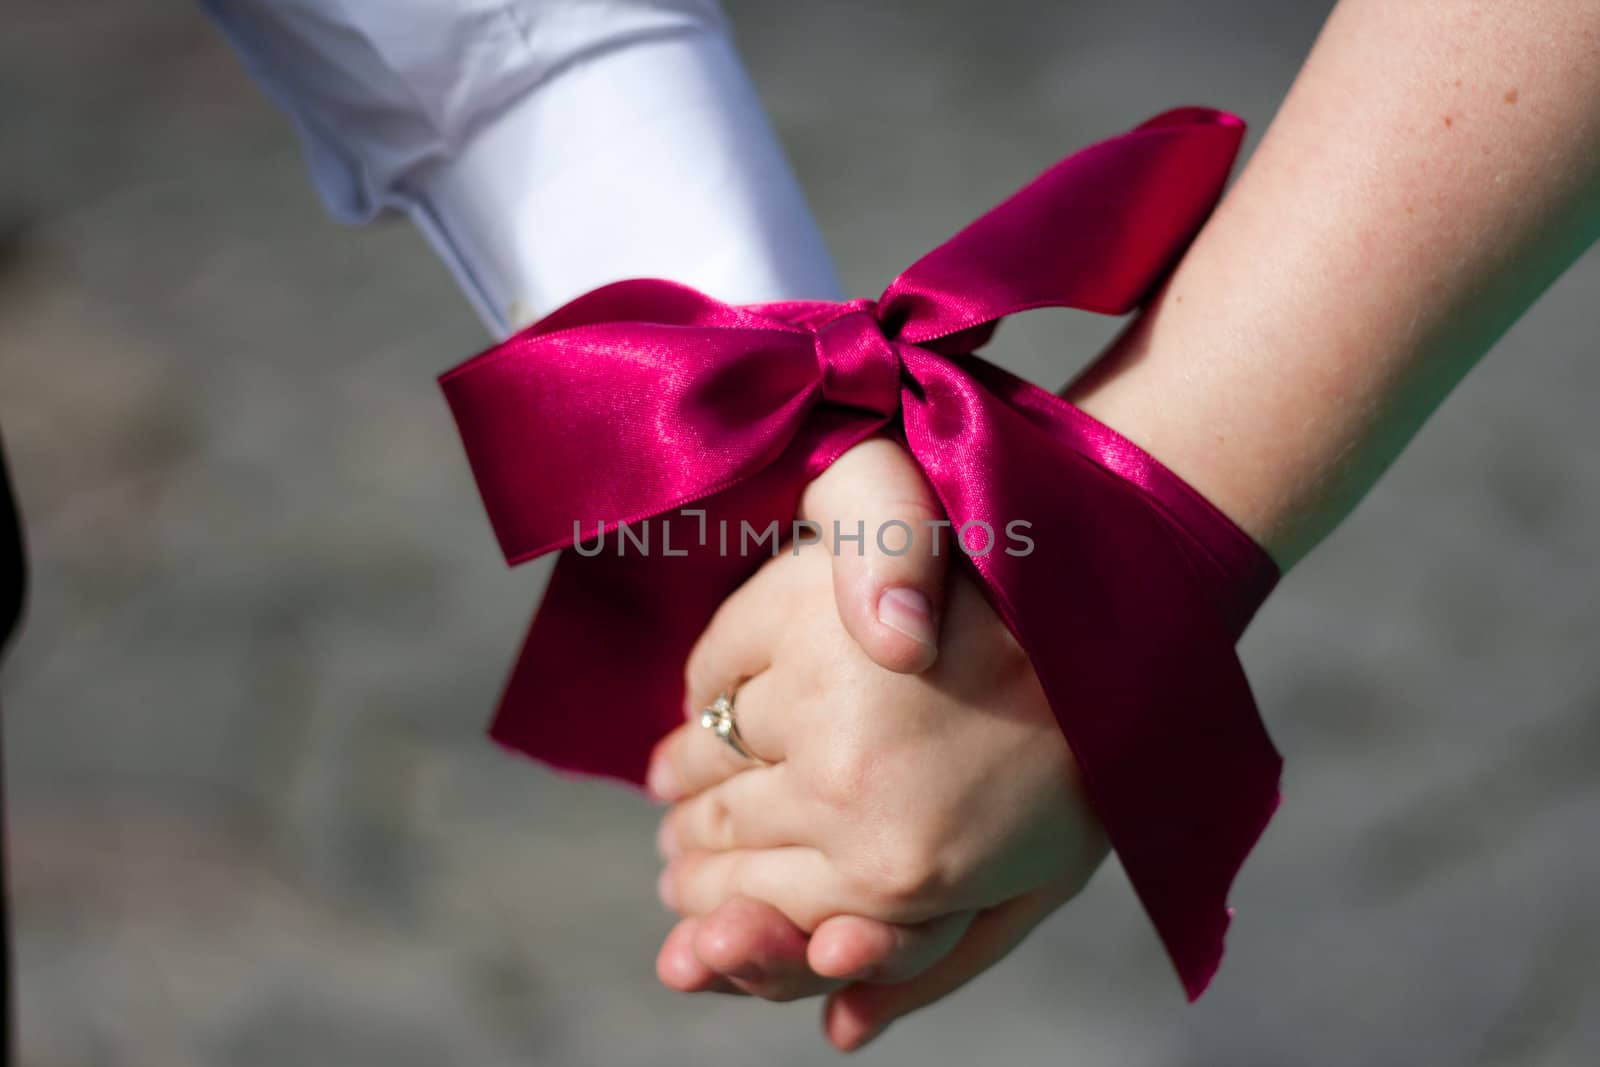 Wedding ceremony - Hands of women and men are associated with red ribbon